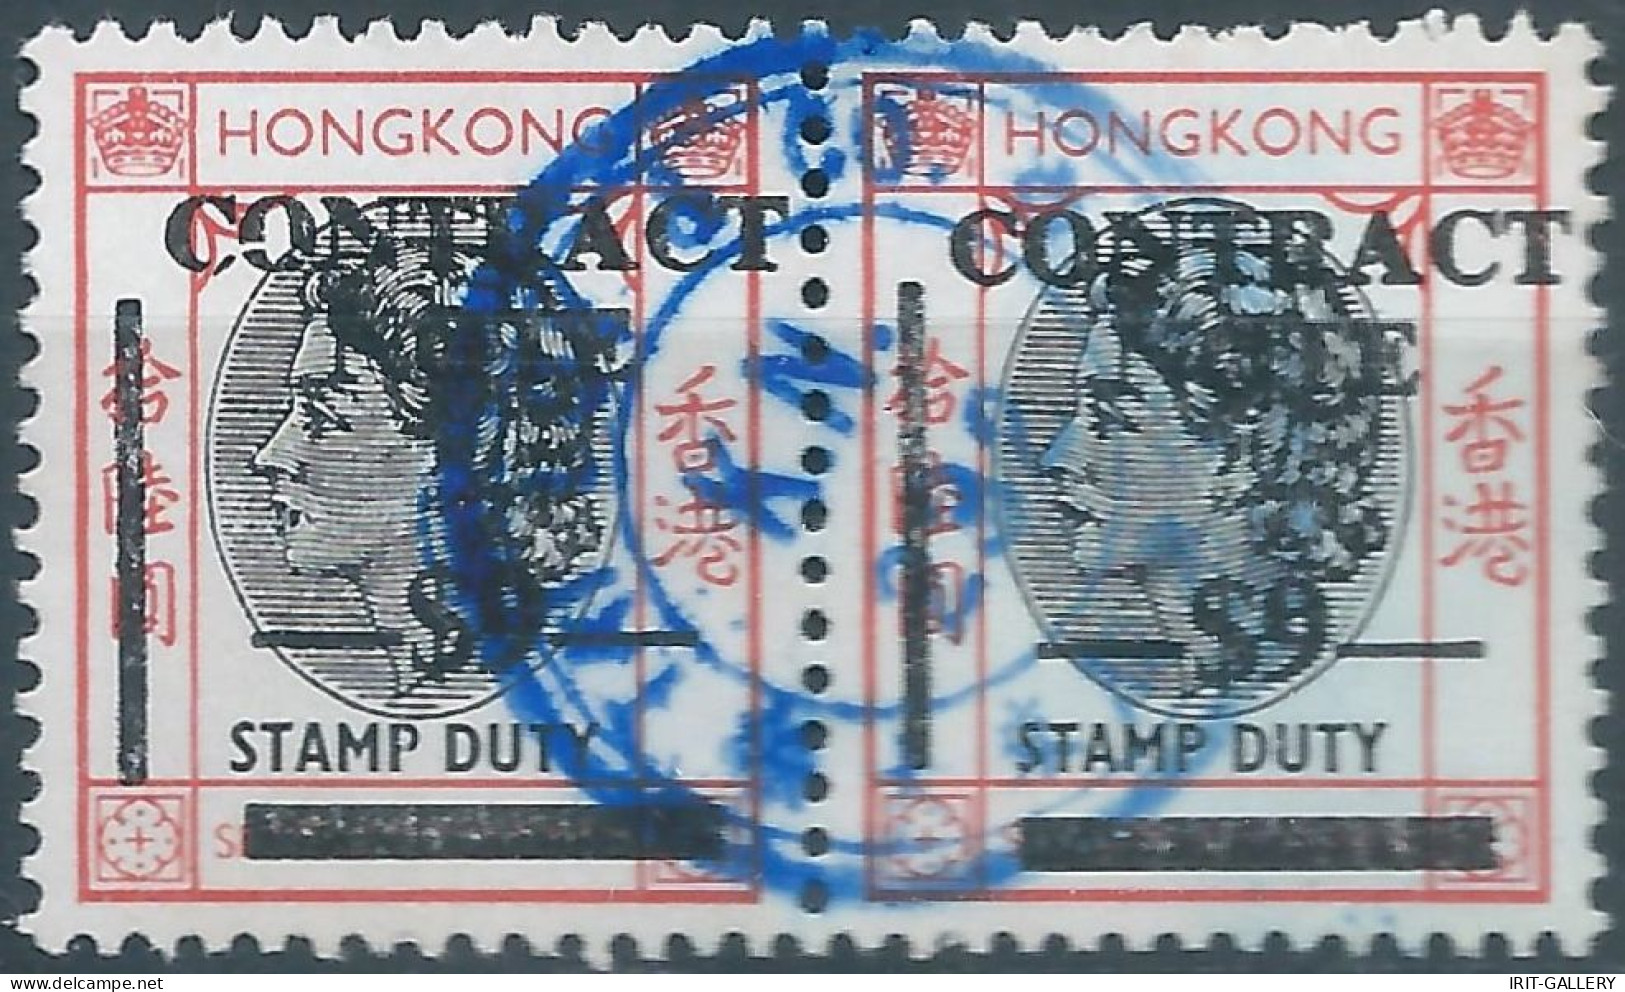 Great Britain-ENGLAND,HONG KONG Revenue Stamp DUTY Contract $9 In Pairs With The Central Cancelled - Postal Fiscal Stamps